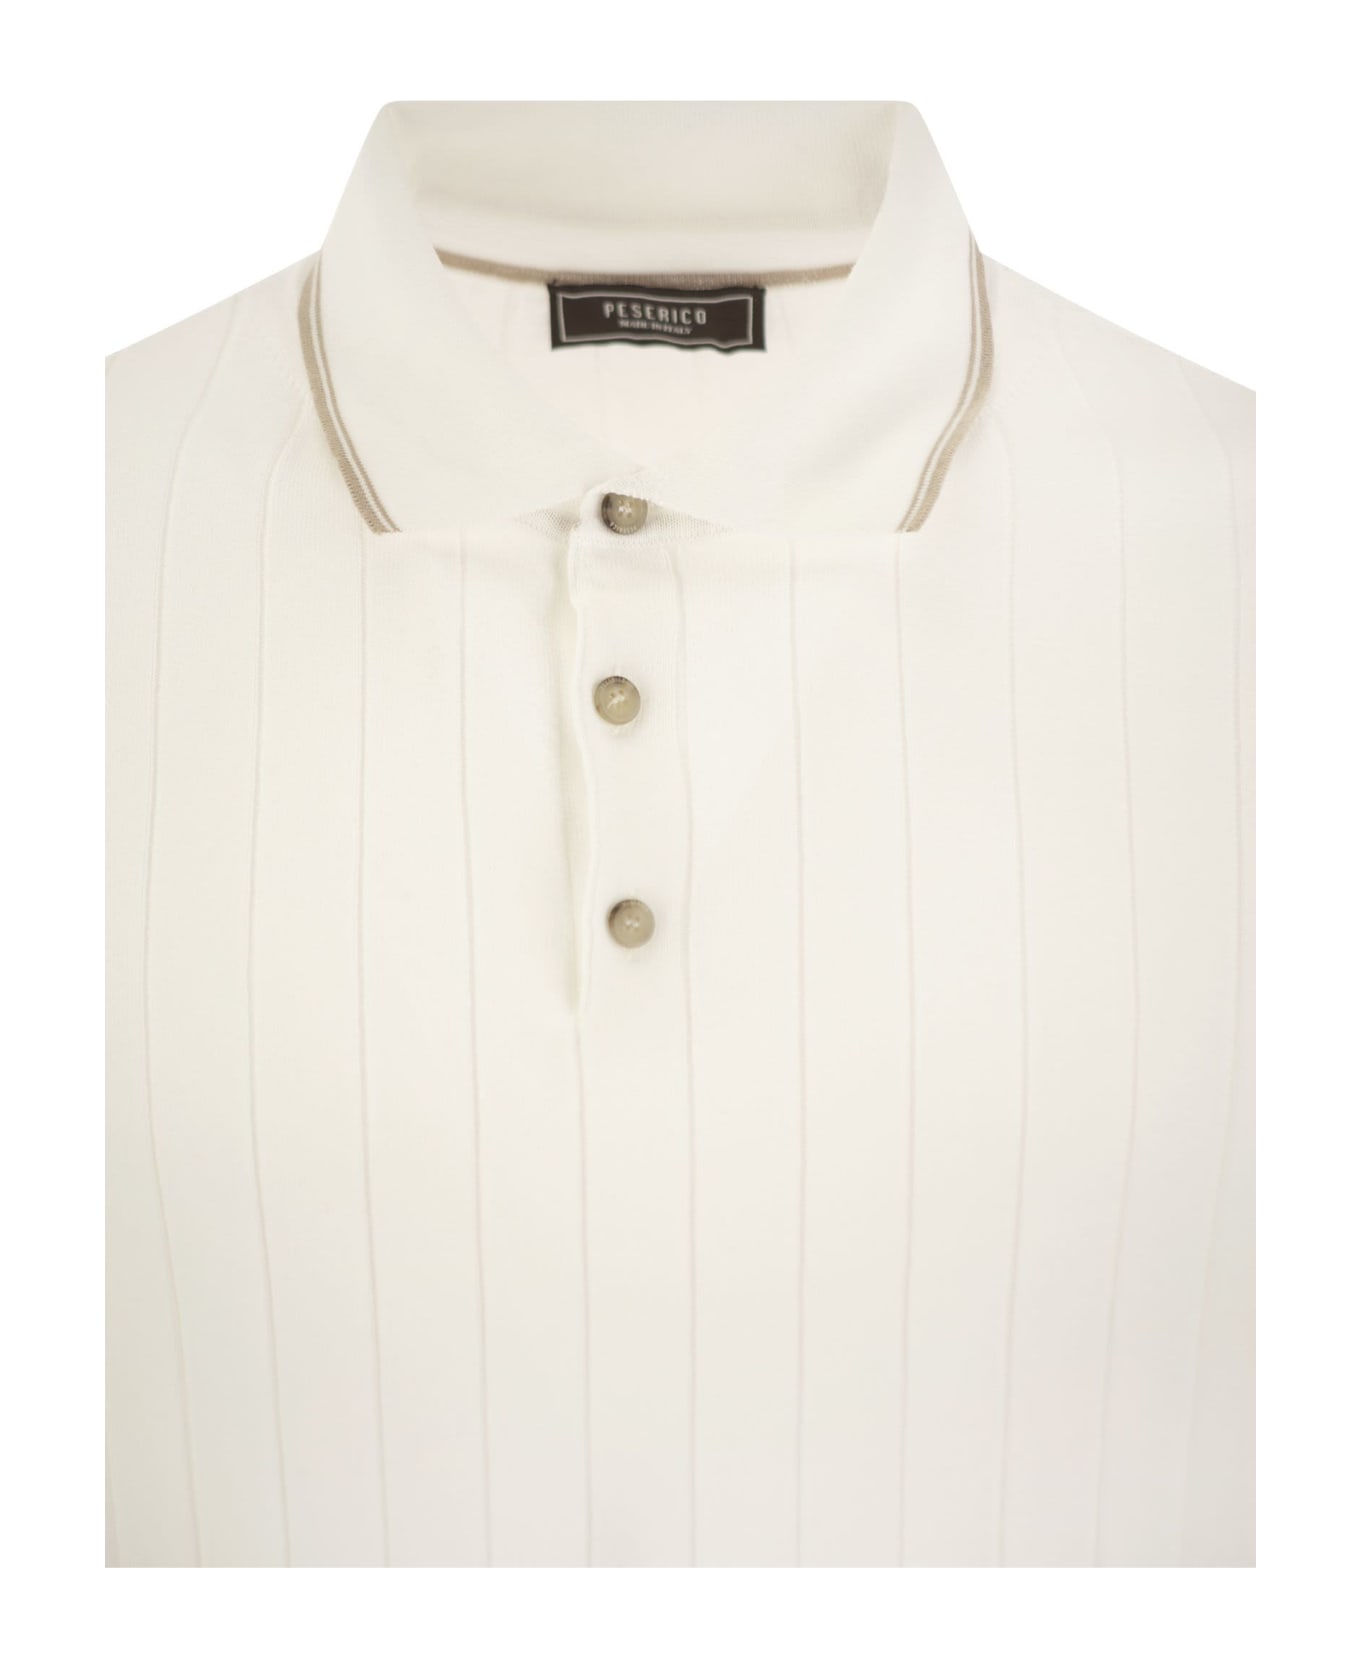 Peserico Polo Shirt In Pure Cotton Crepe Yarn With Flat Rib - White/beige